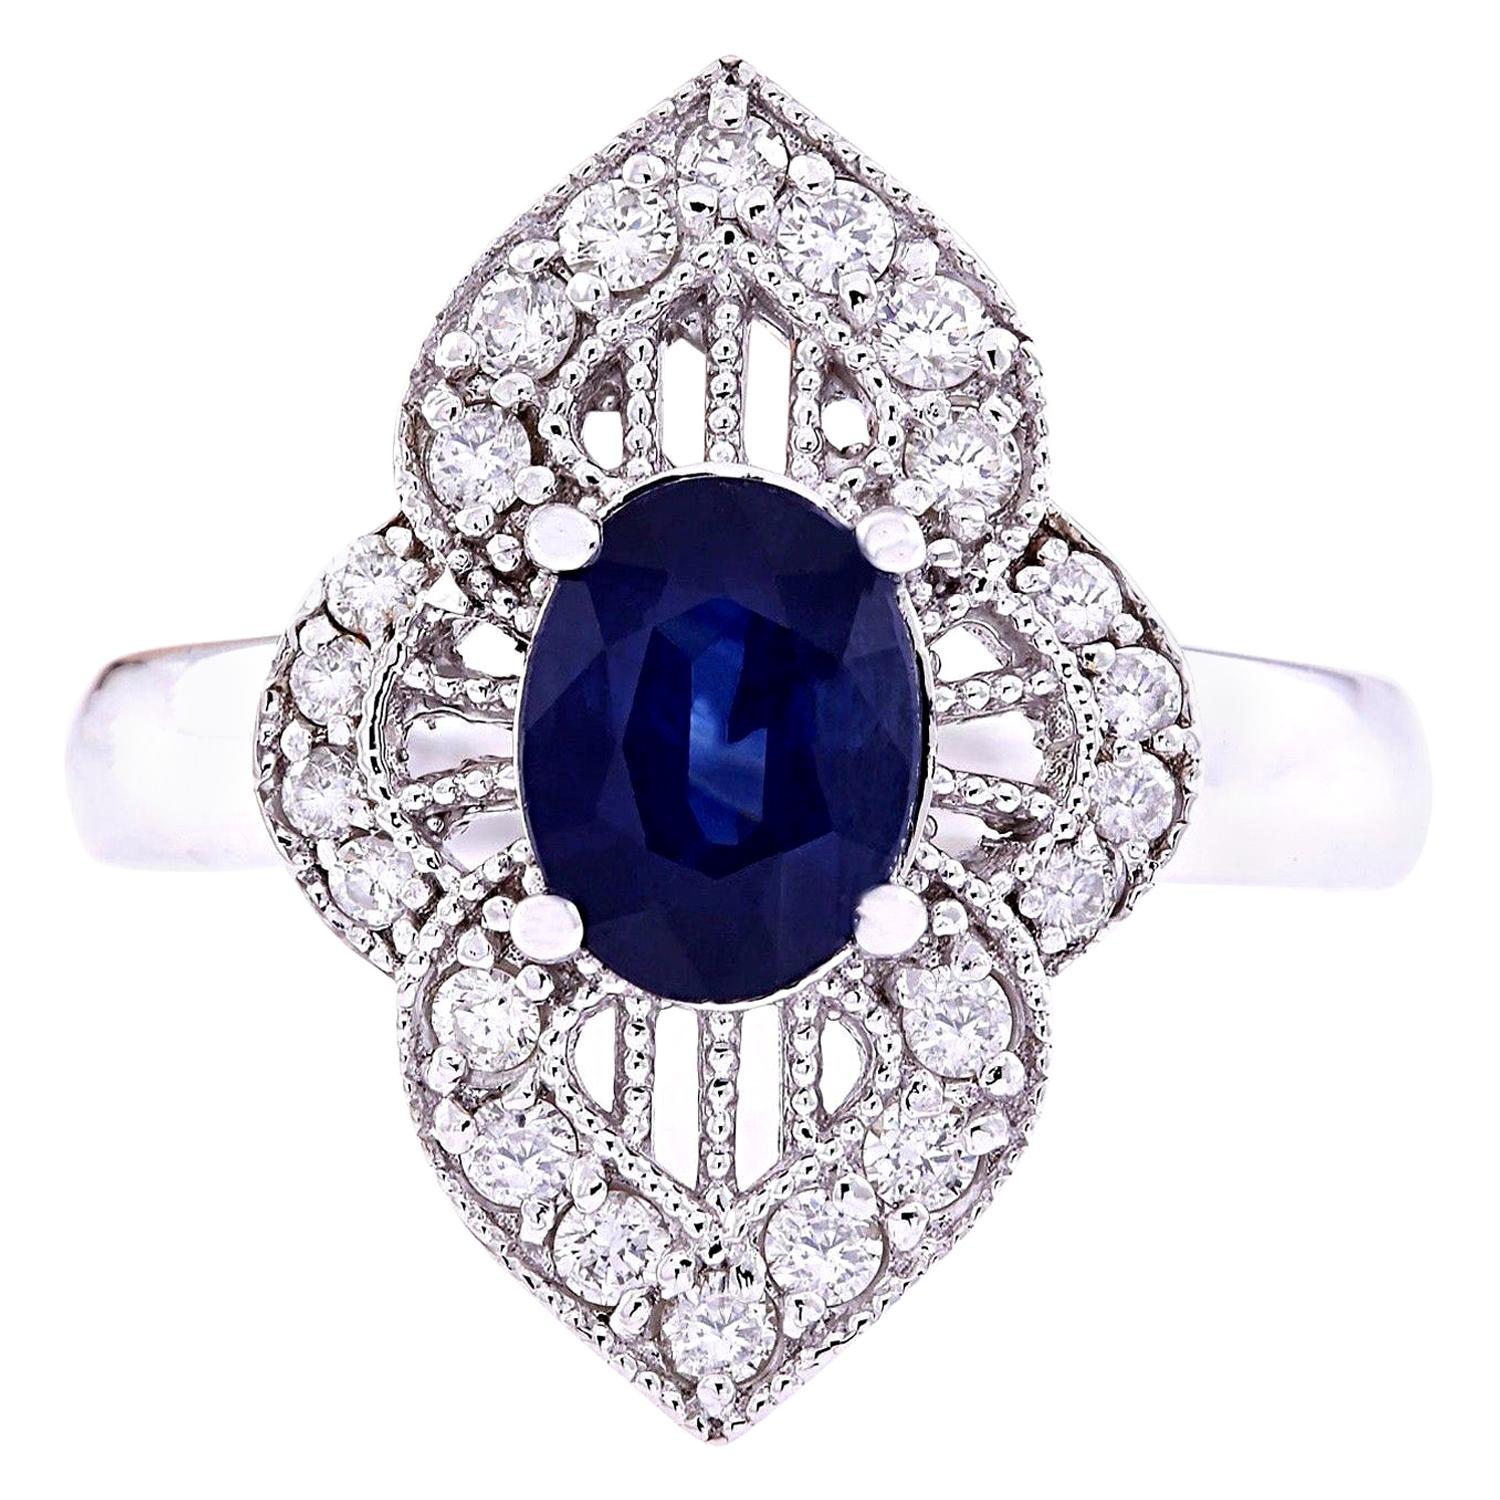 1.85 Carat Natural Sapphire 14 Karat Solid White Gold Diamond Ring For Sale